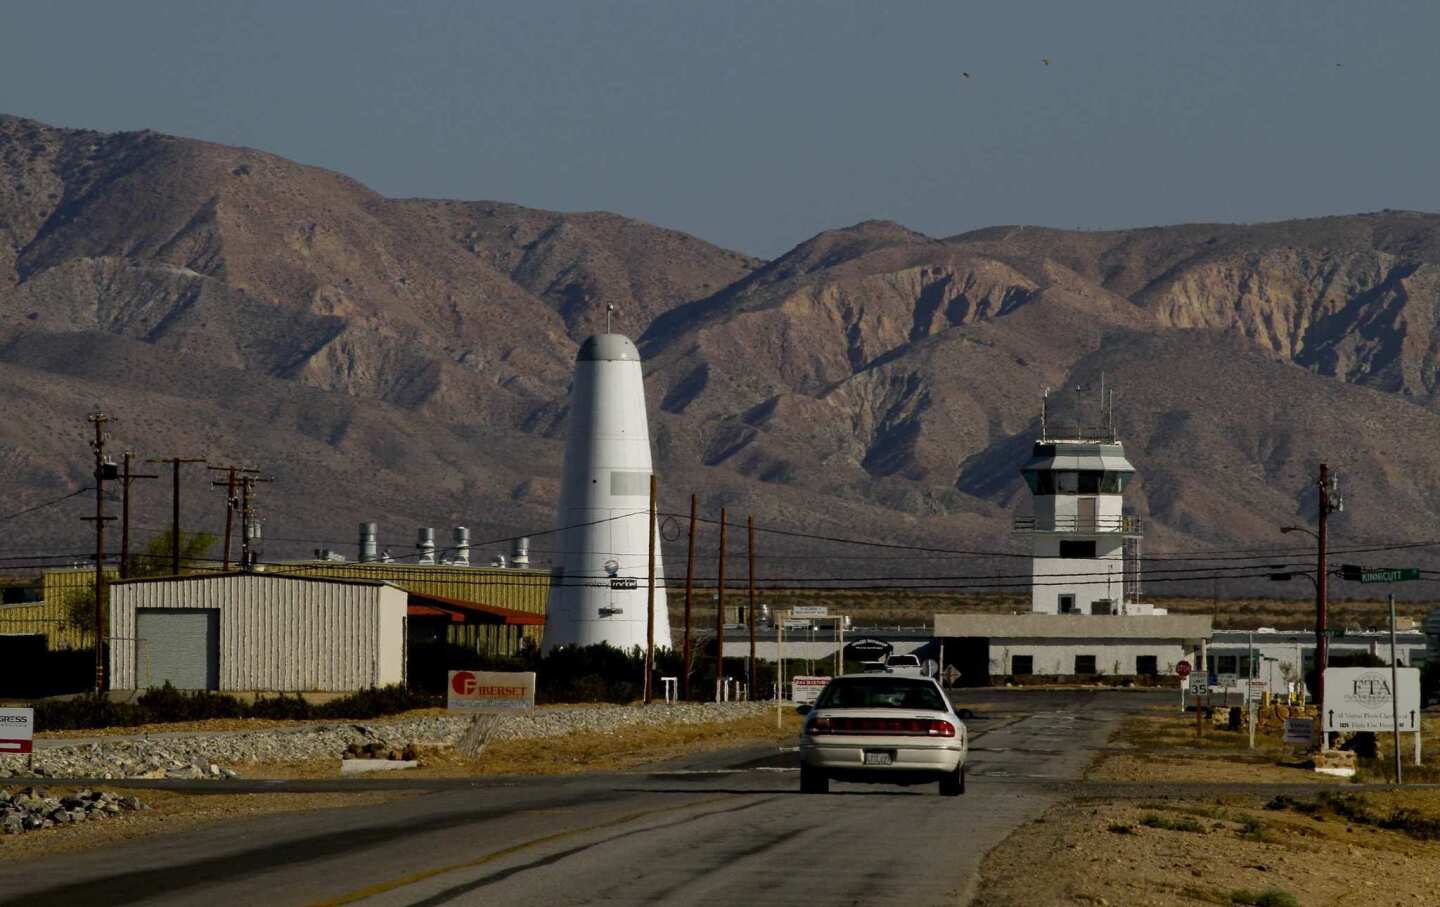 Companies are drawn to the Mojave Air & Space Port for a variety of reasons. There's the wide-open stretches of desert where rockets can be tested. There's the long runway, which allows easy takeoffs for airplanes loaded with rockets that have to be launched from high altitudes. And there are few neighbors to complain about the noise ¿ though the space port is only about 100 miles northeast of Los Angeles.